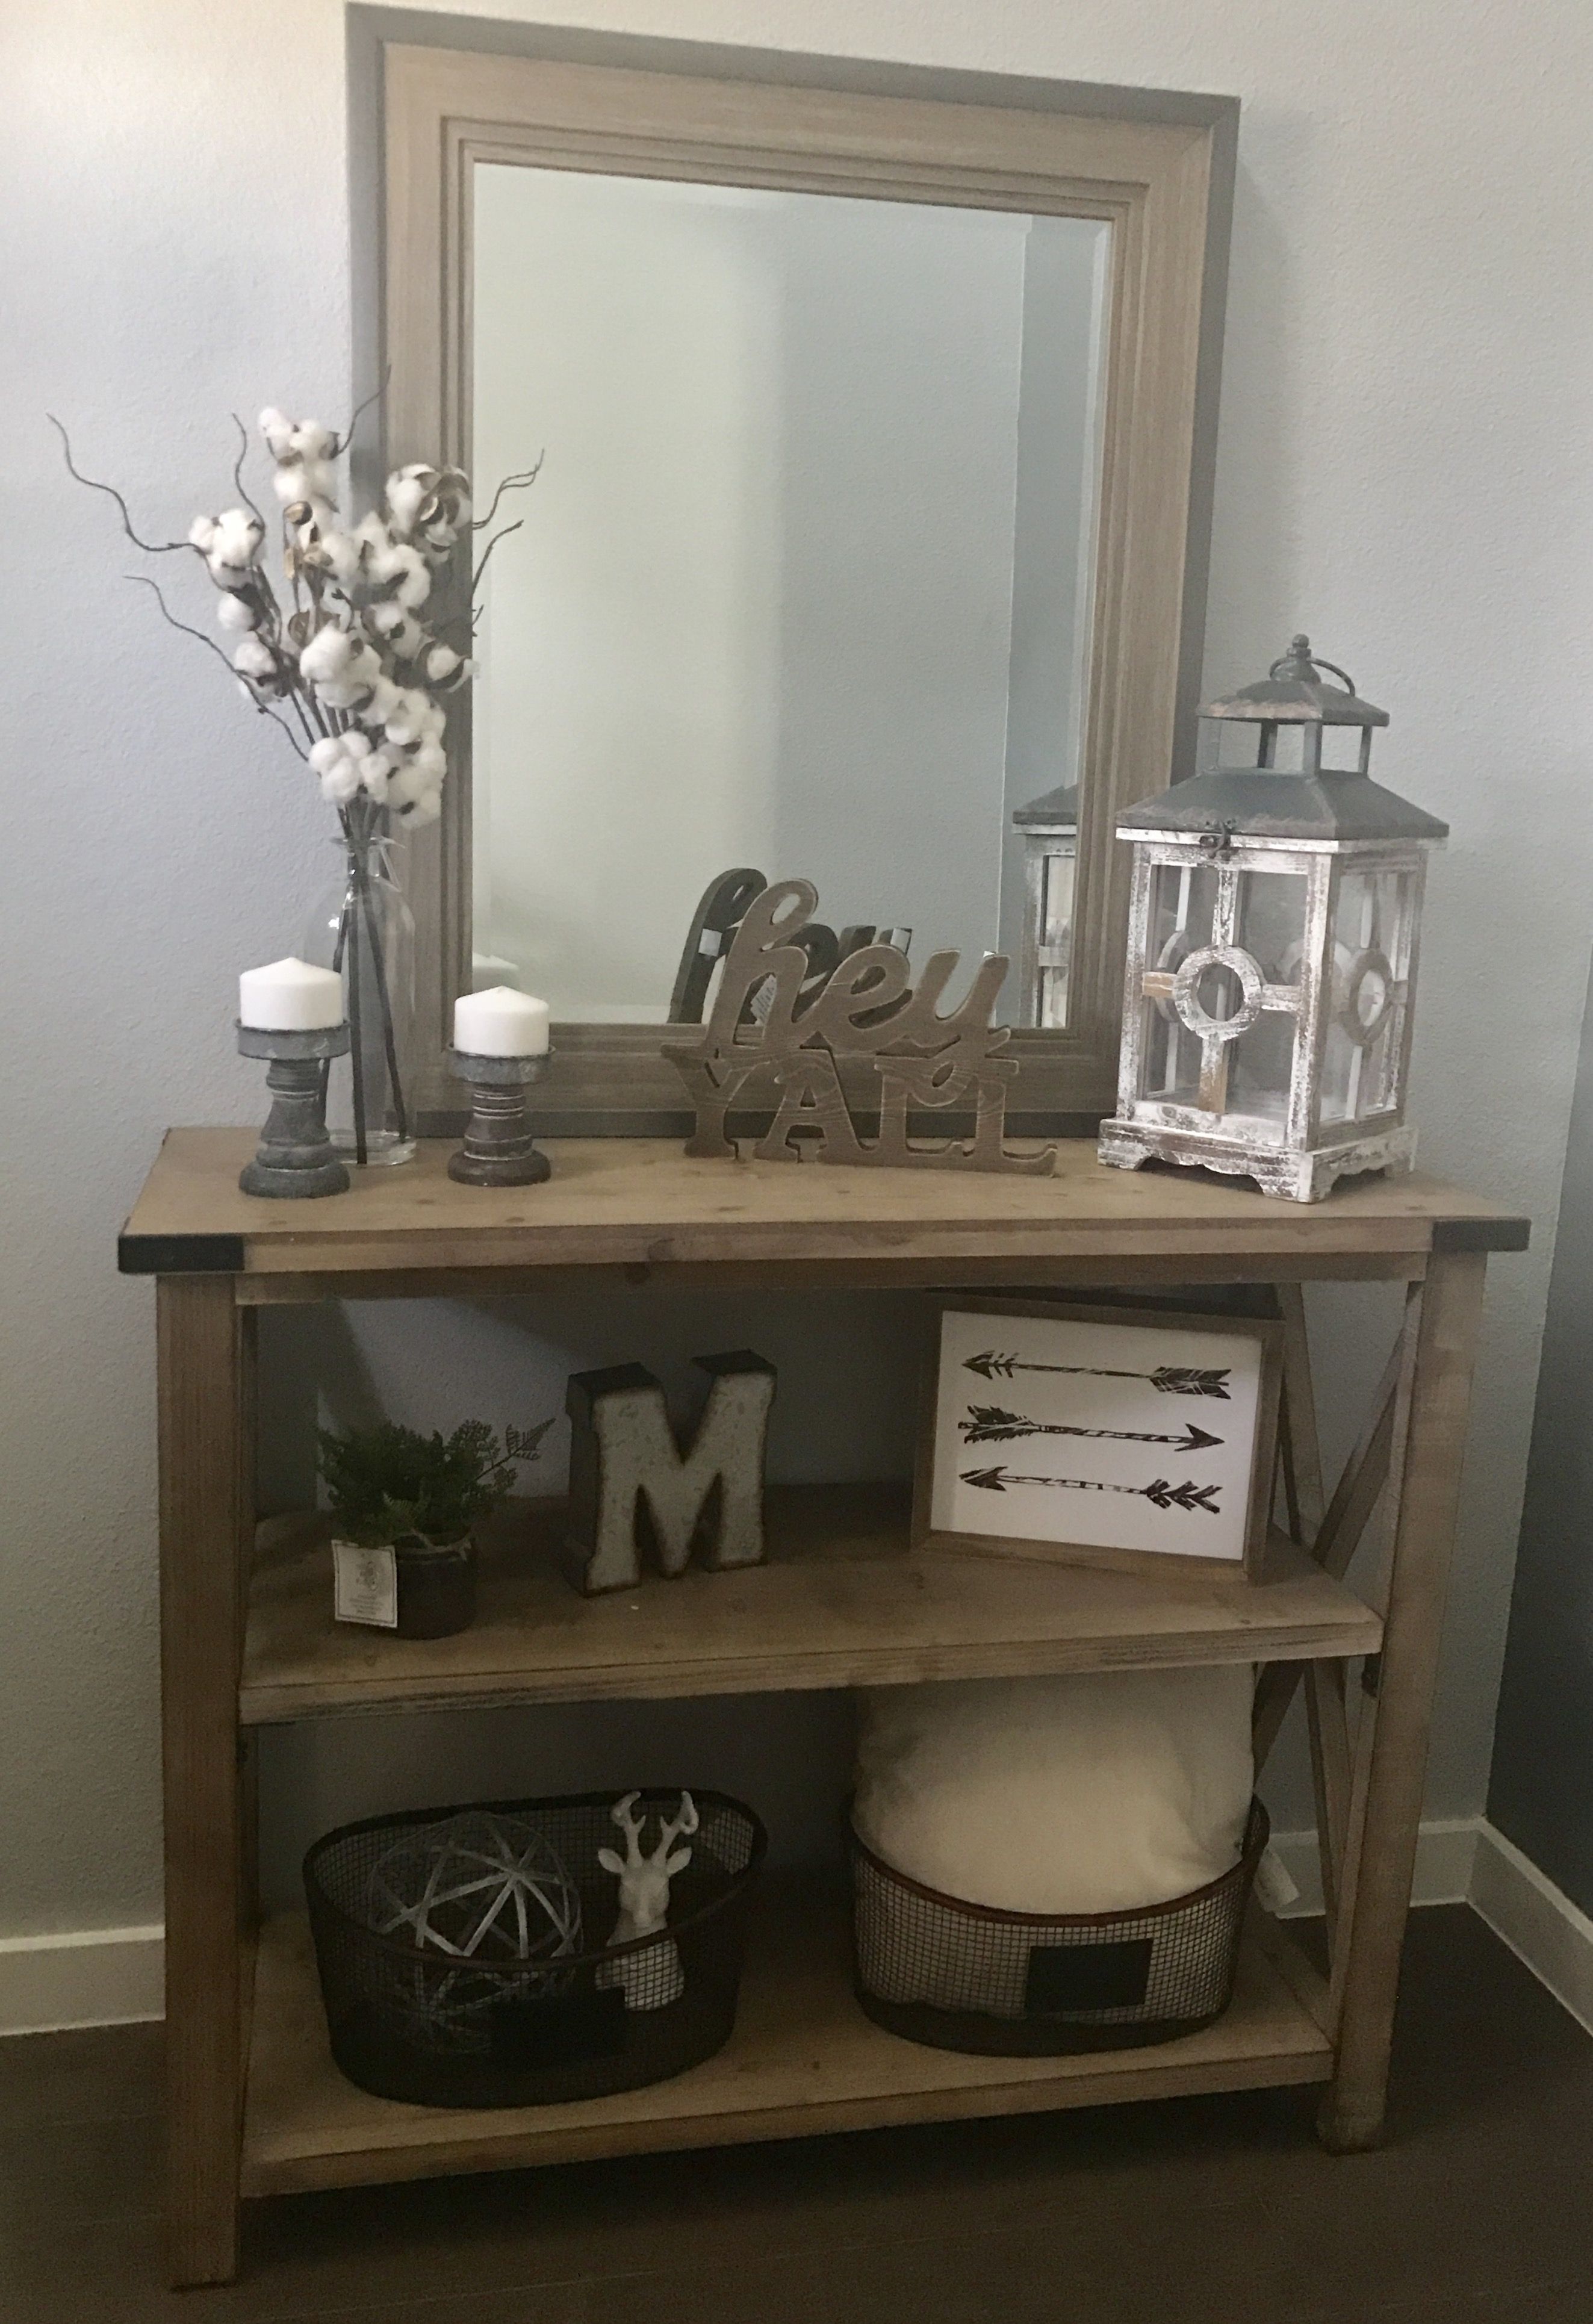 new modern farmhouse entry way console table decor mcmillen home round accent bar pub set black gloss side rustic end fabric placemats and stool shabby chic bathroom porch chairs